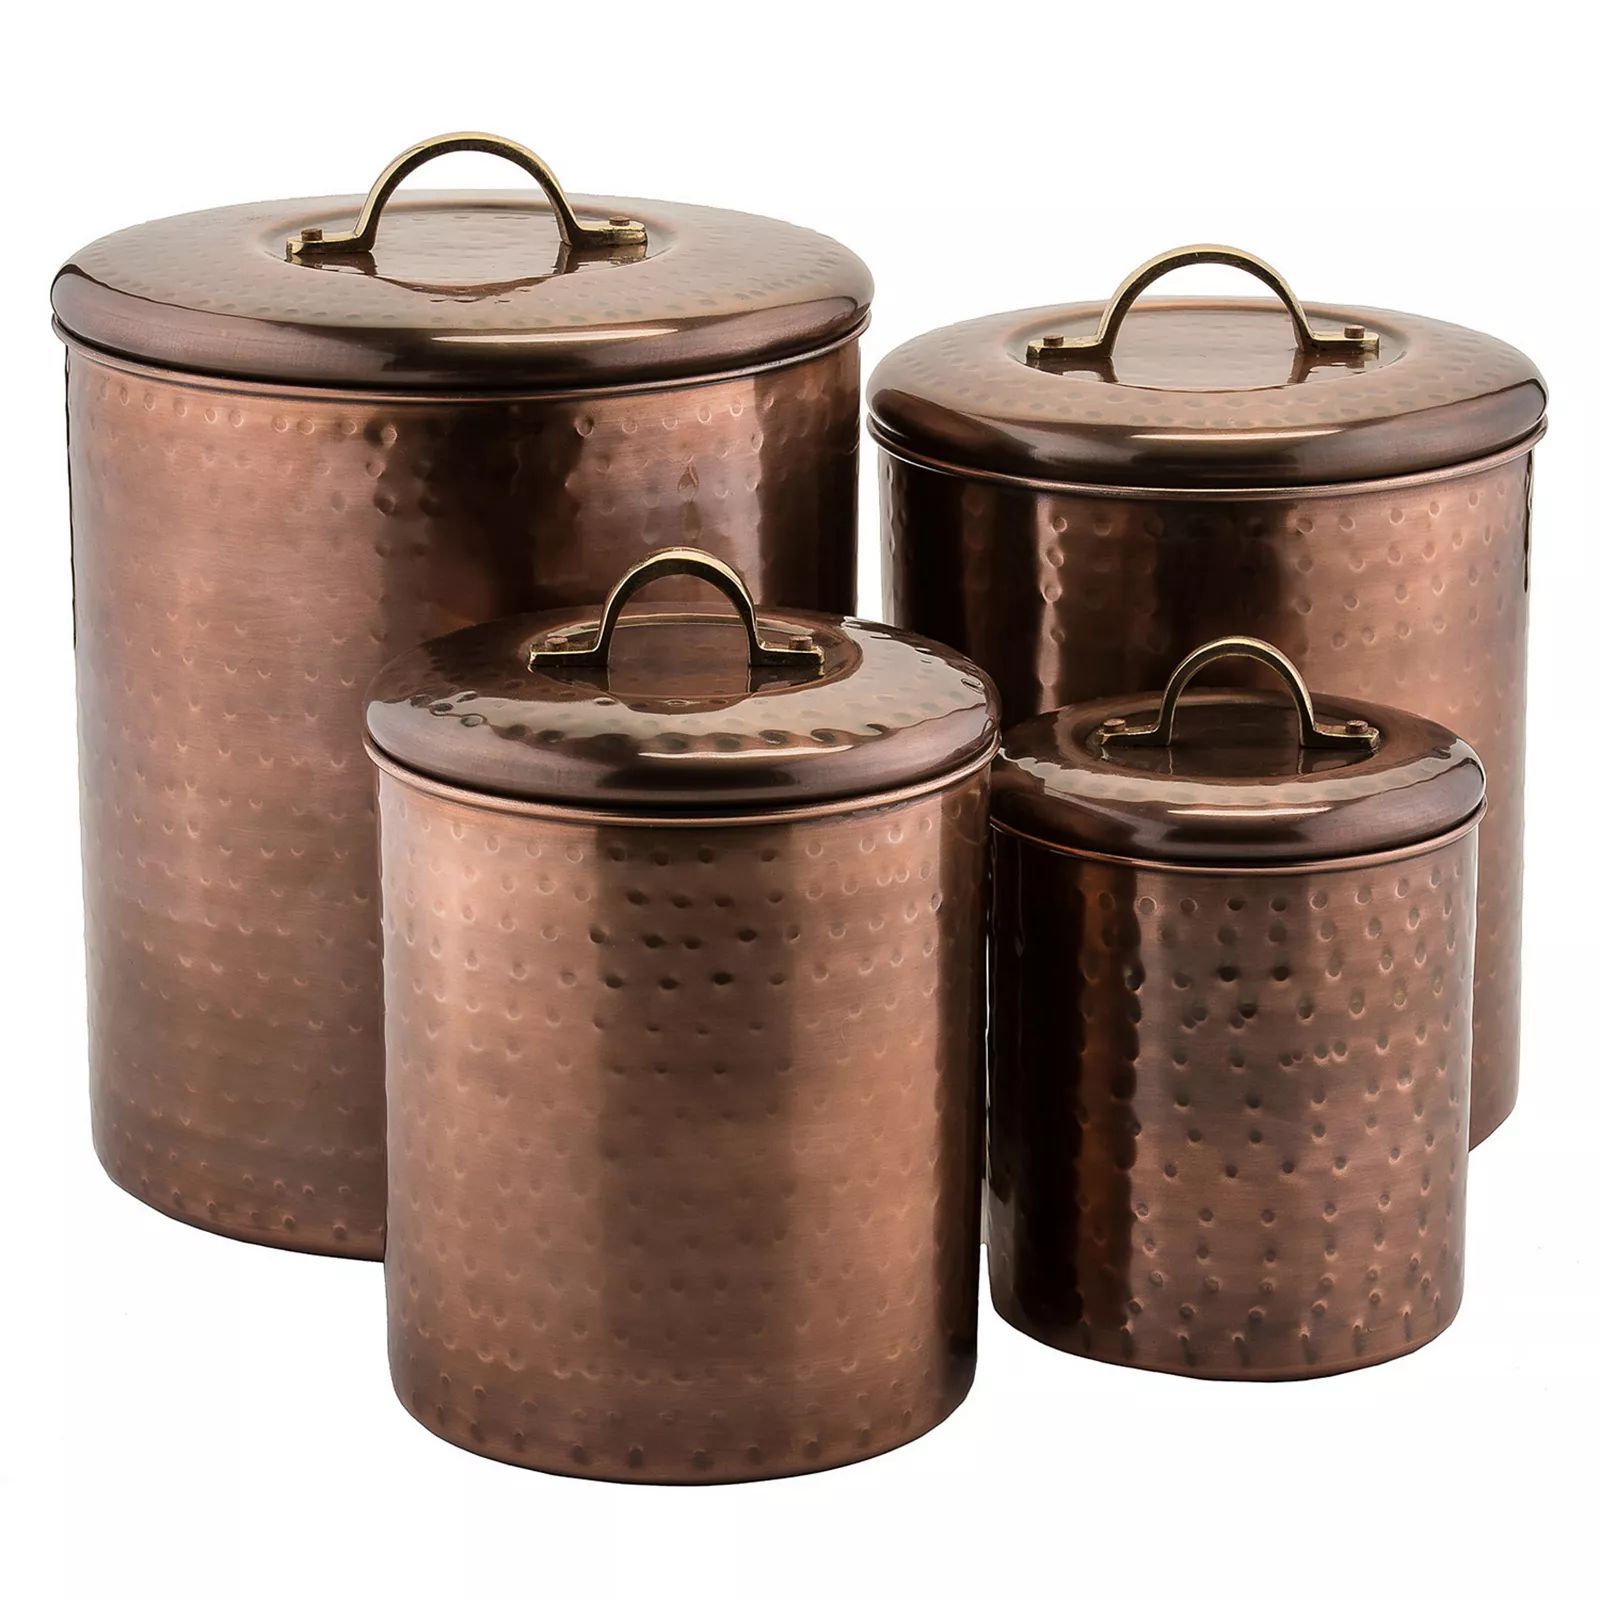 Old Dutch 4-pc. Antique Hammered Copper Canister Set, Brown, 4 PIECE | Kohl's